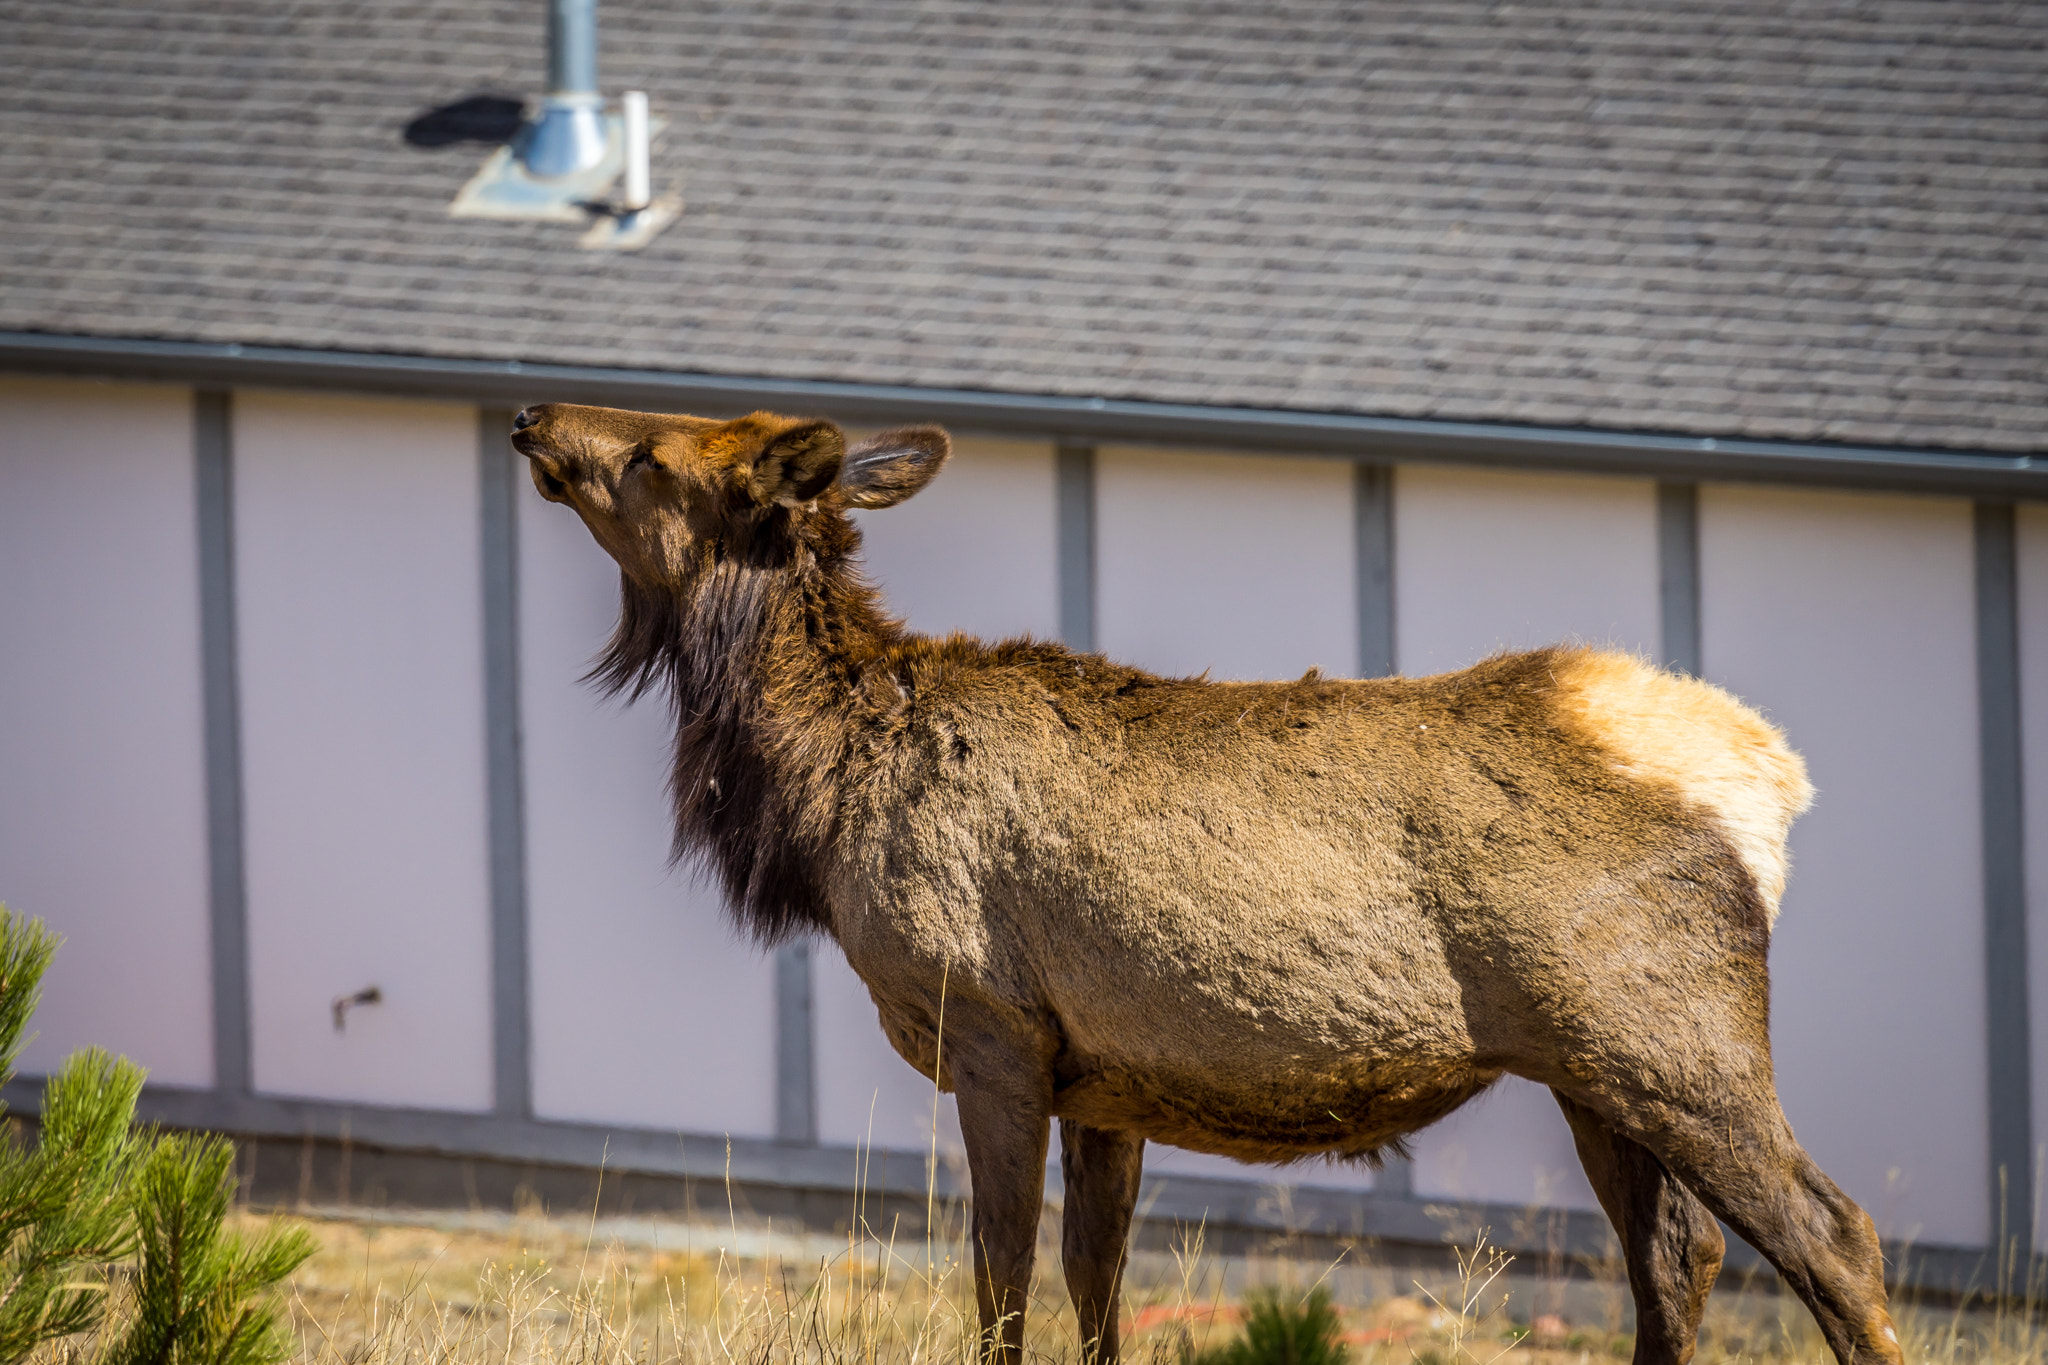 Sony a7 II sample photo. Elk in the colorado foothills photography